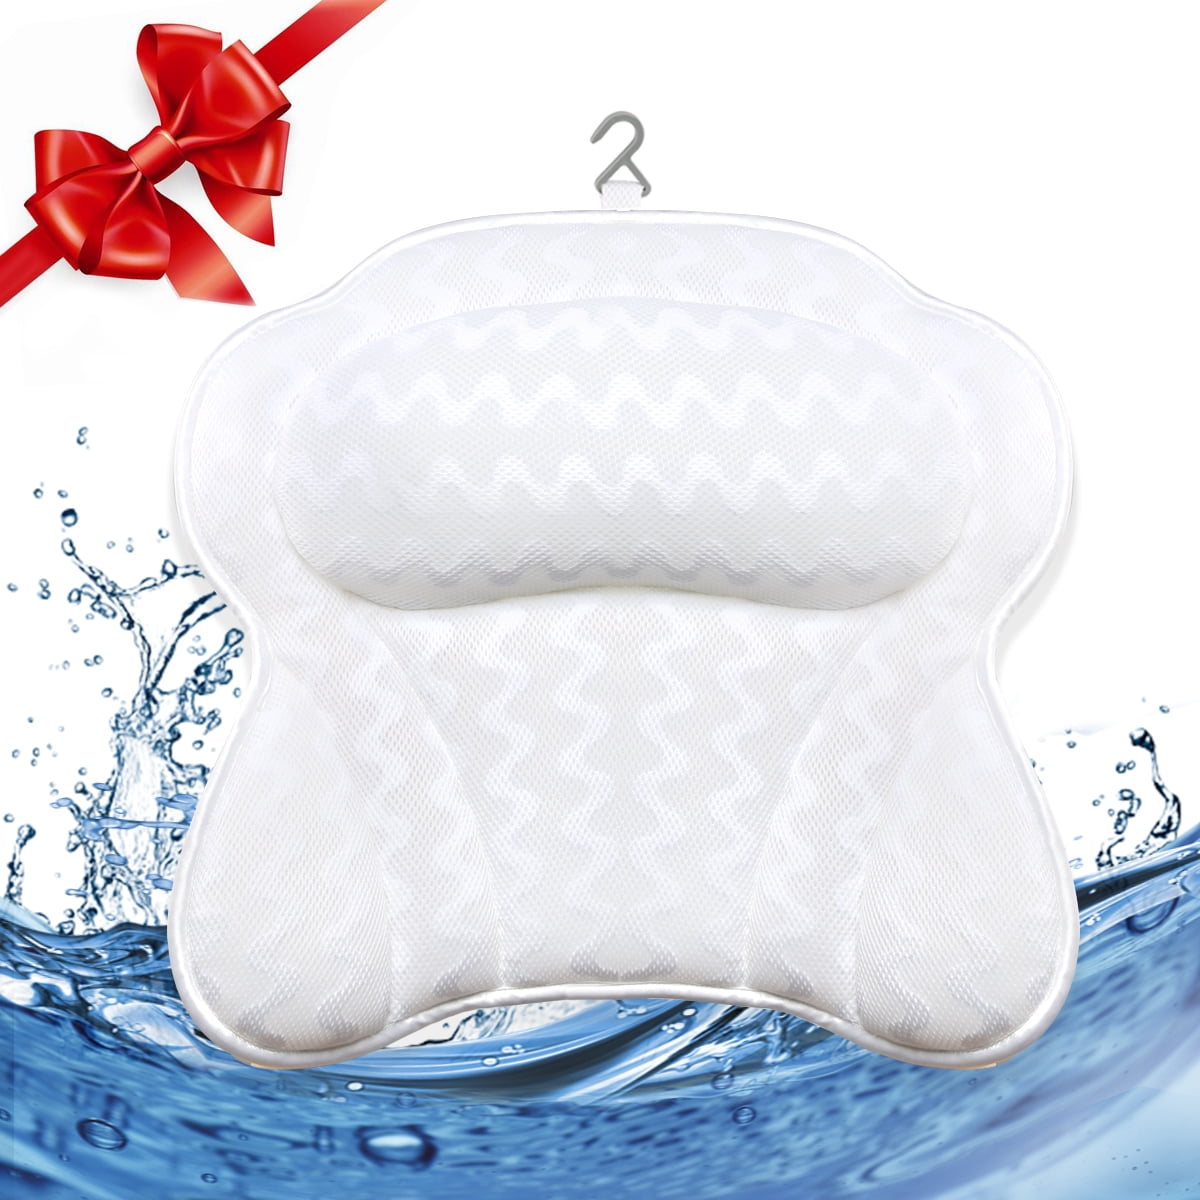 JQ_ Non-Slip Bath Pillow Spa Relaxing Spongy Cushion With Suction Cup Bathroom 